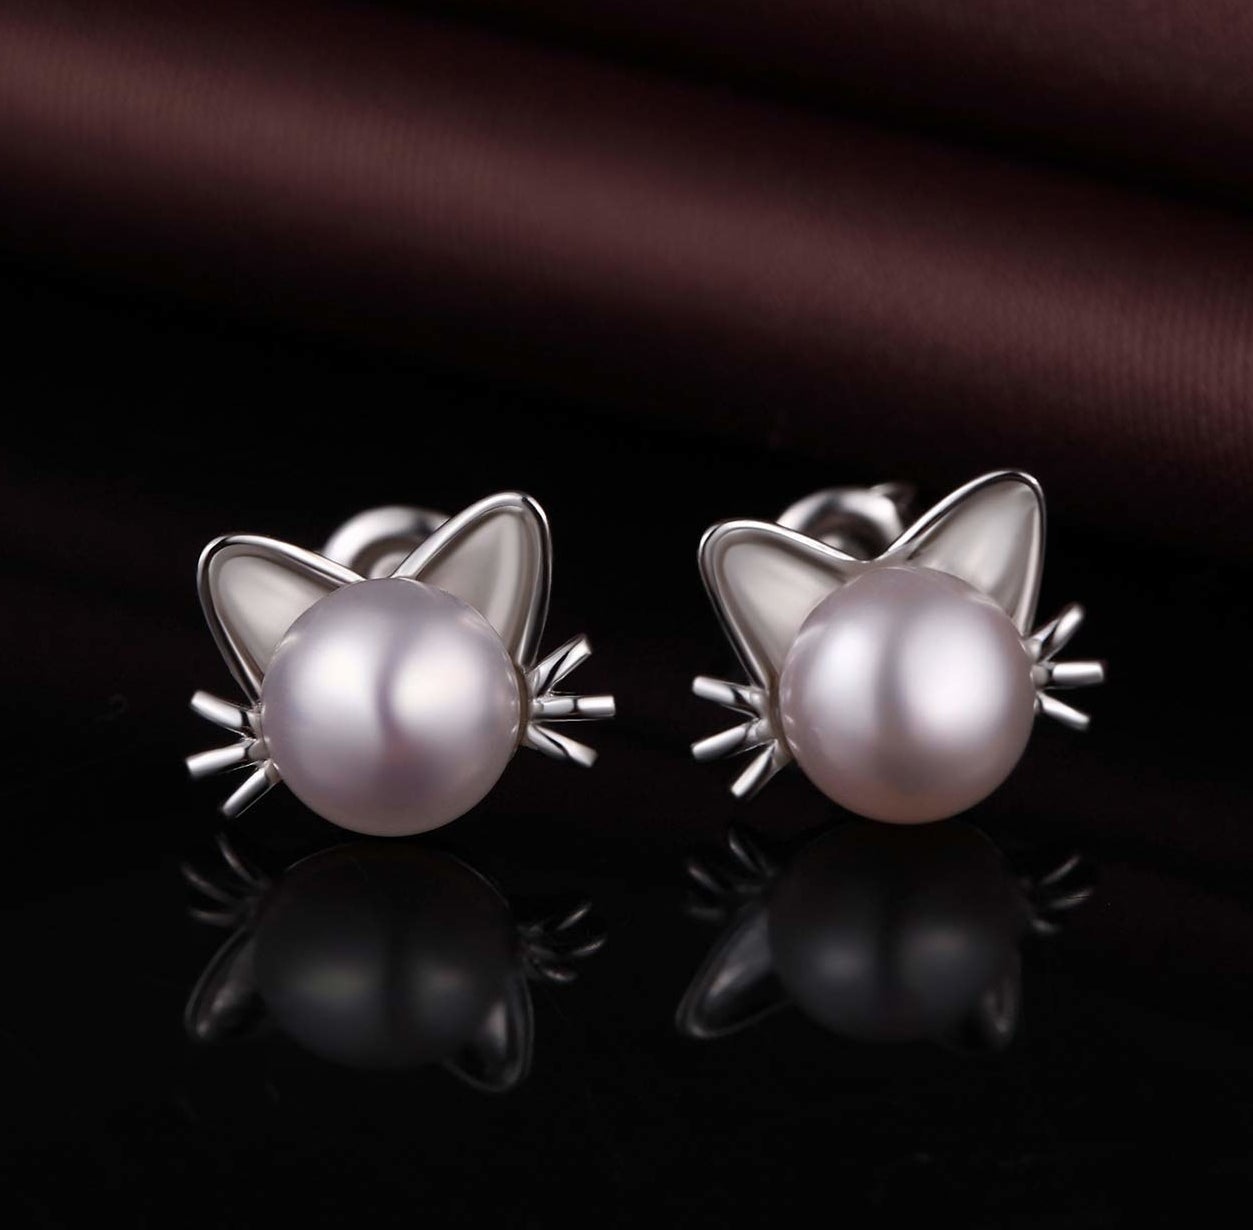 Pearl stud earrings with silver earrings and whiskers